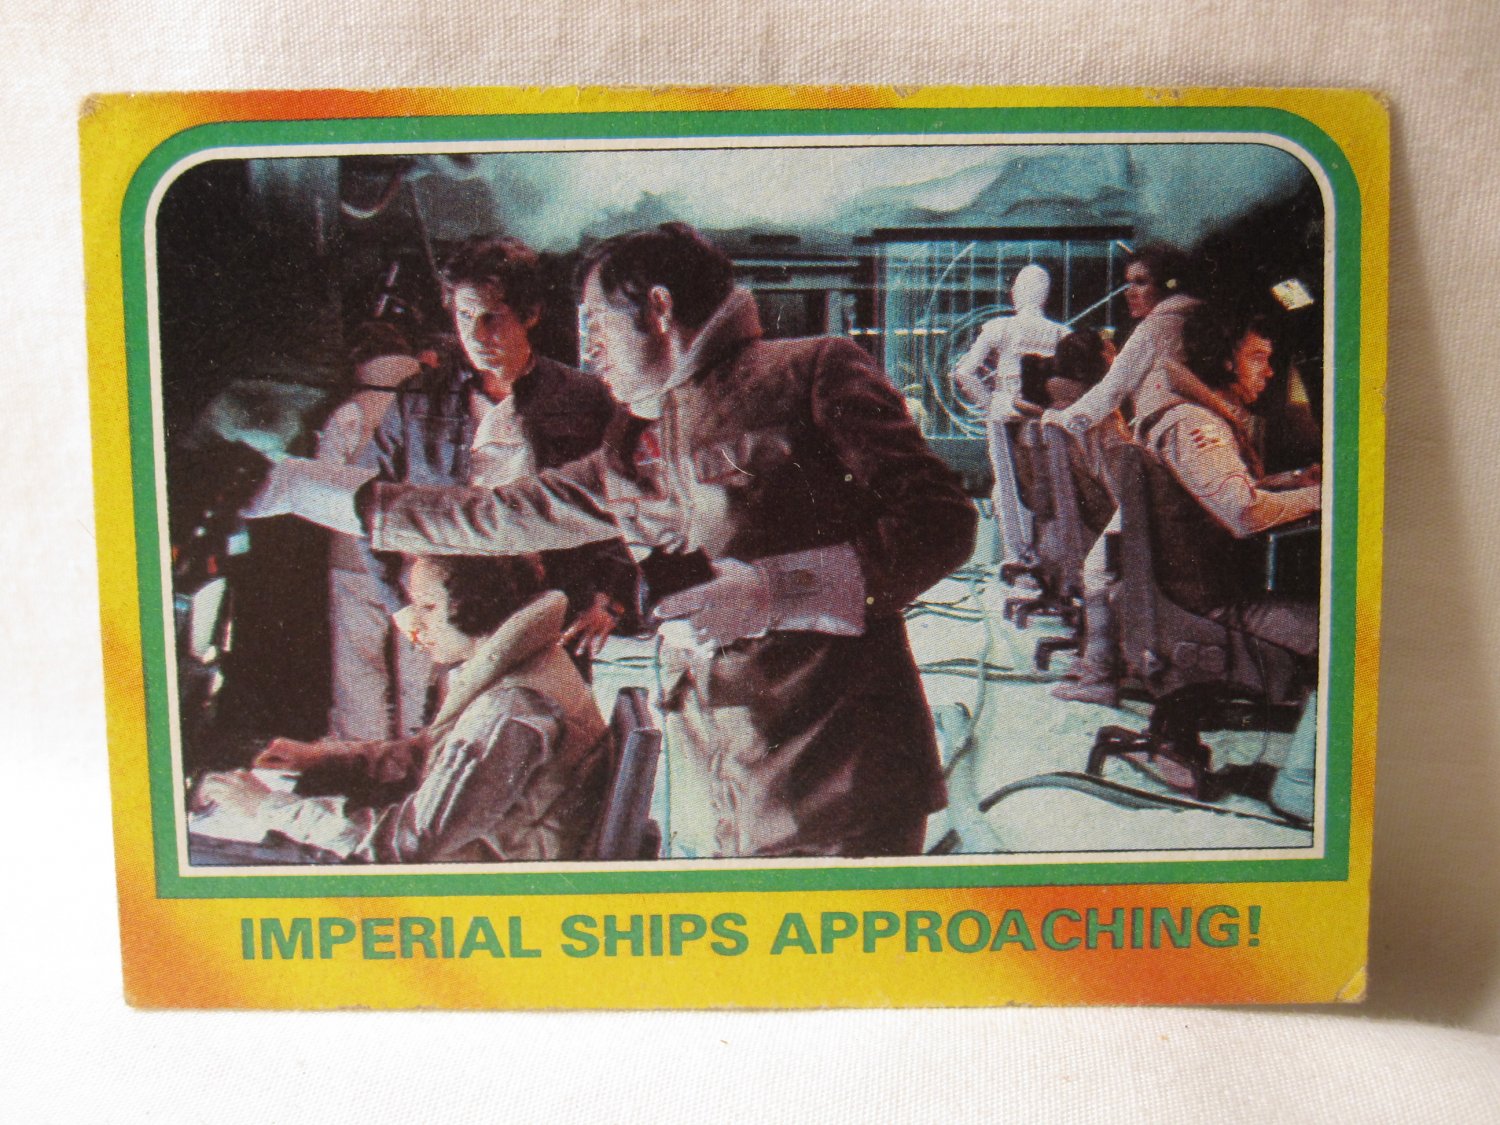 1980 Star Wars - Empire Strikes Back Trading card #282: Imperial Ships Approaching